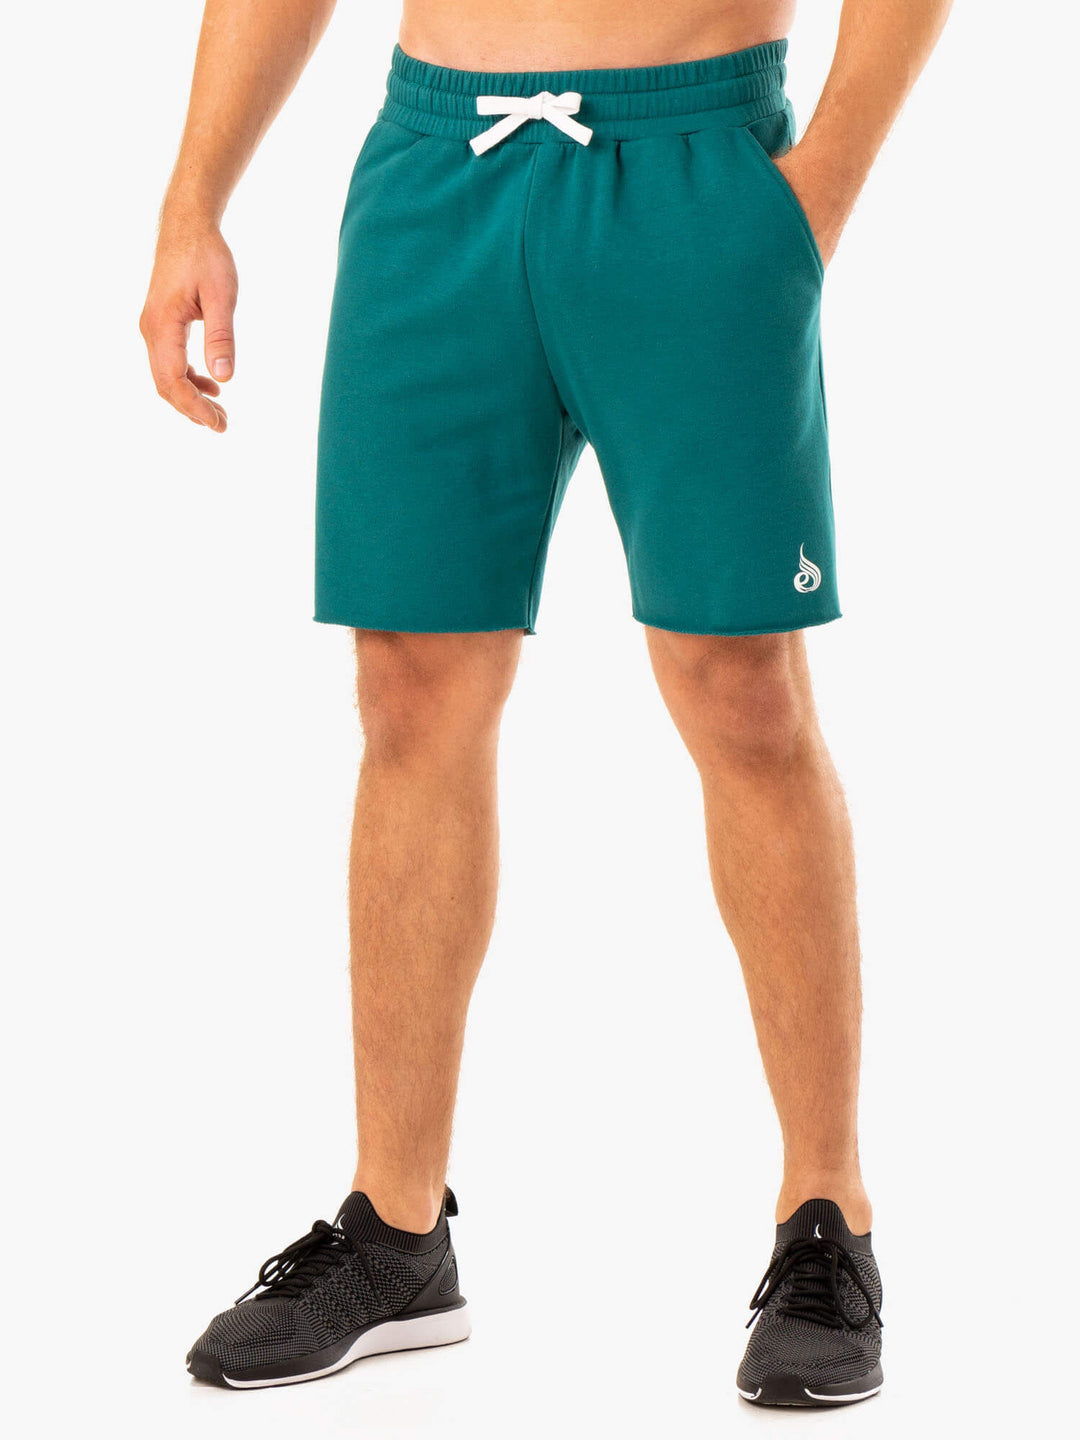 Recharge Track Gym Short - Teal Clothing Ryderwear 